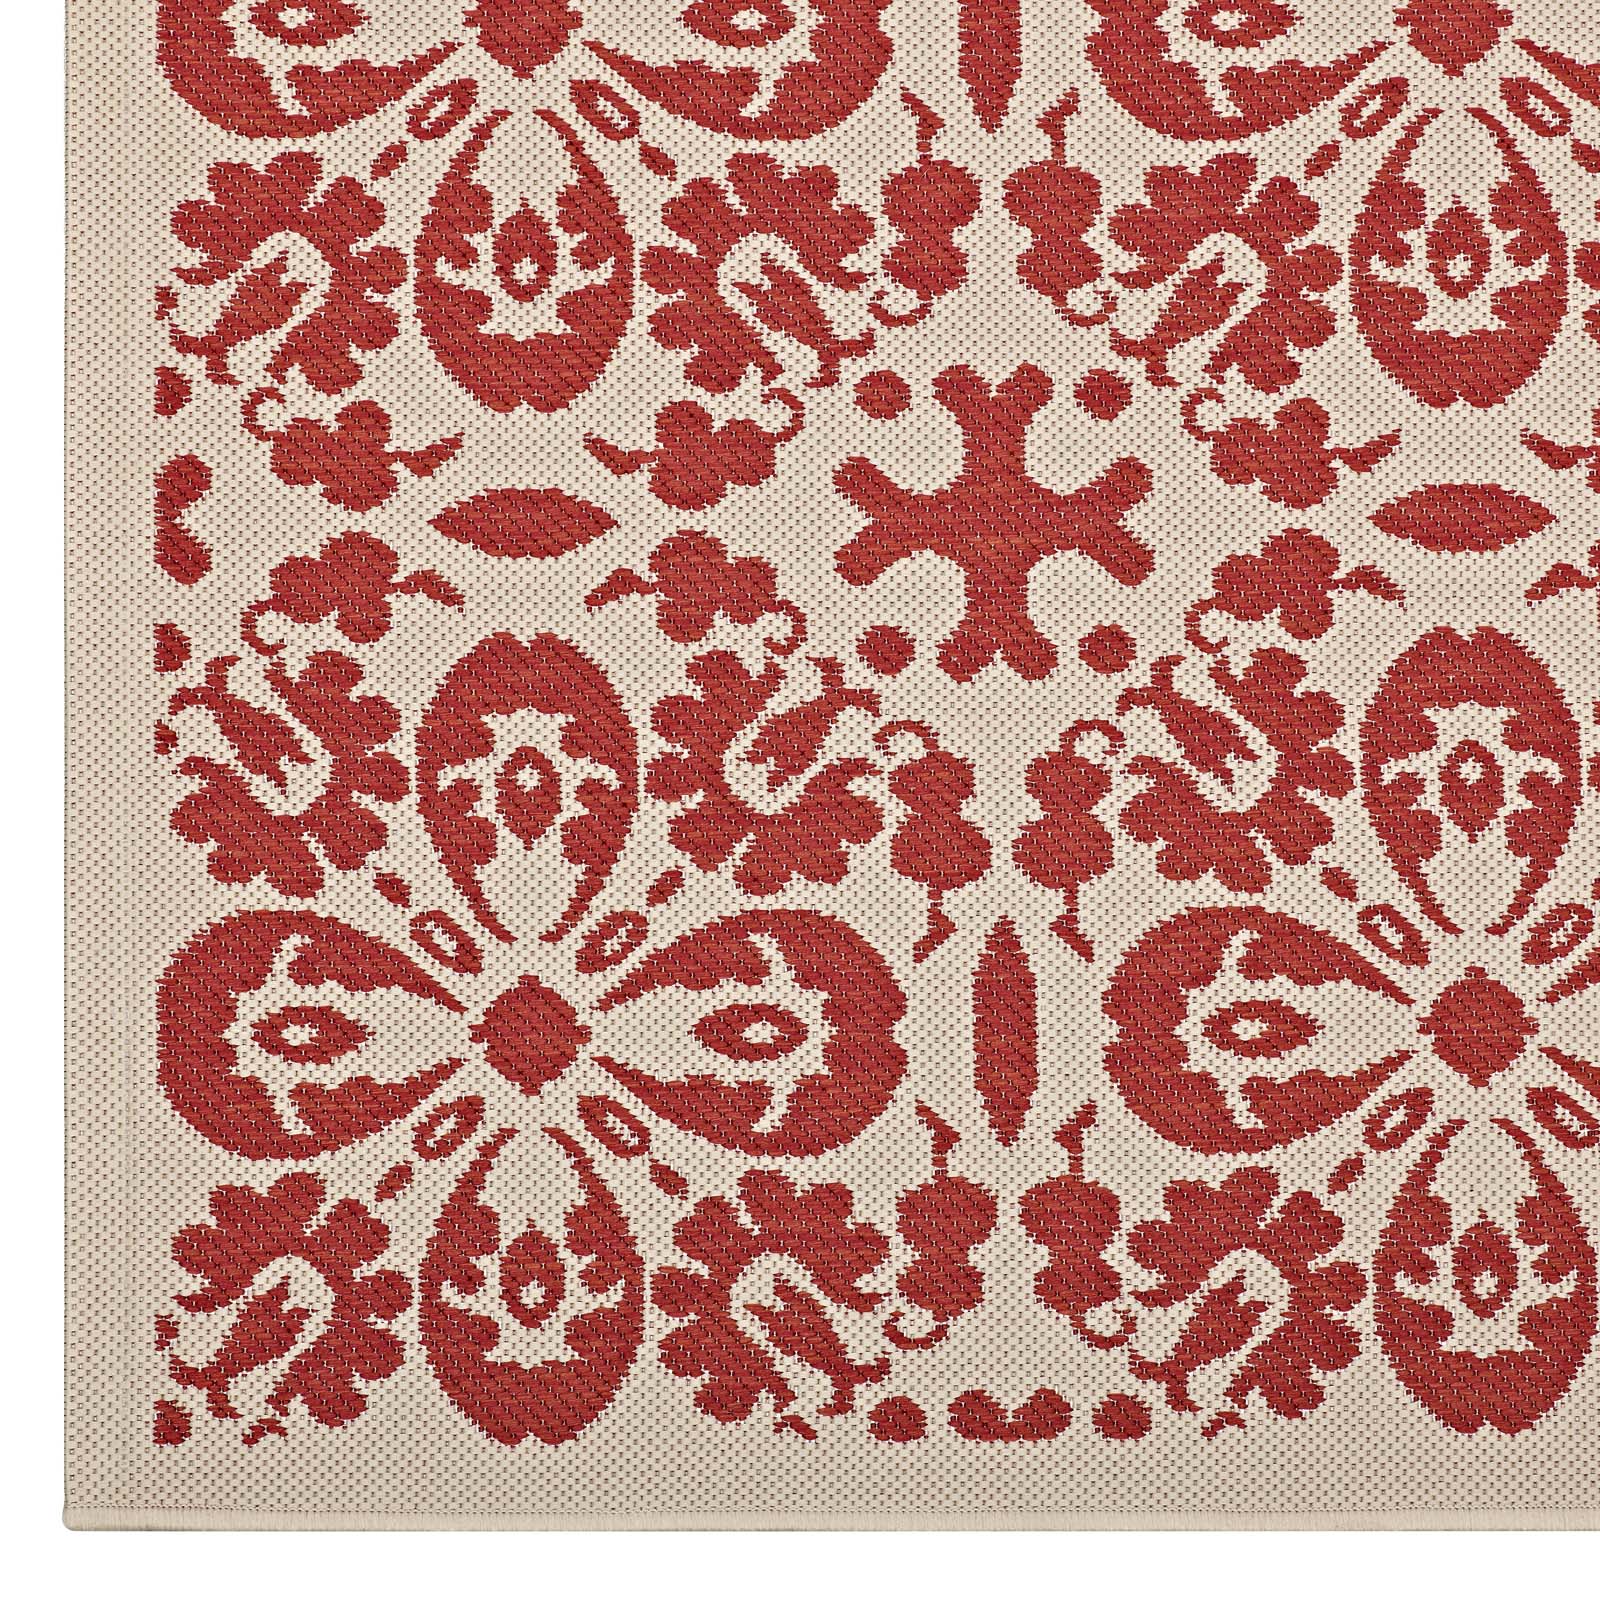 Modway Outdoor Rugs - Ariana Vintage Floral Trellis 5x8 Indoor and Outdoor Area Rug Red & Beige